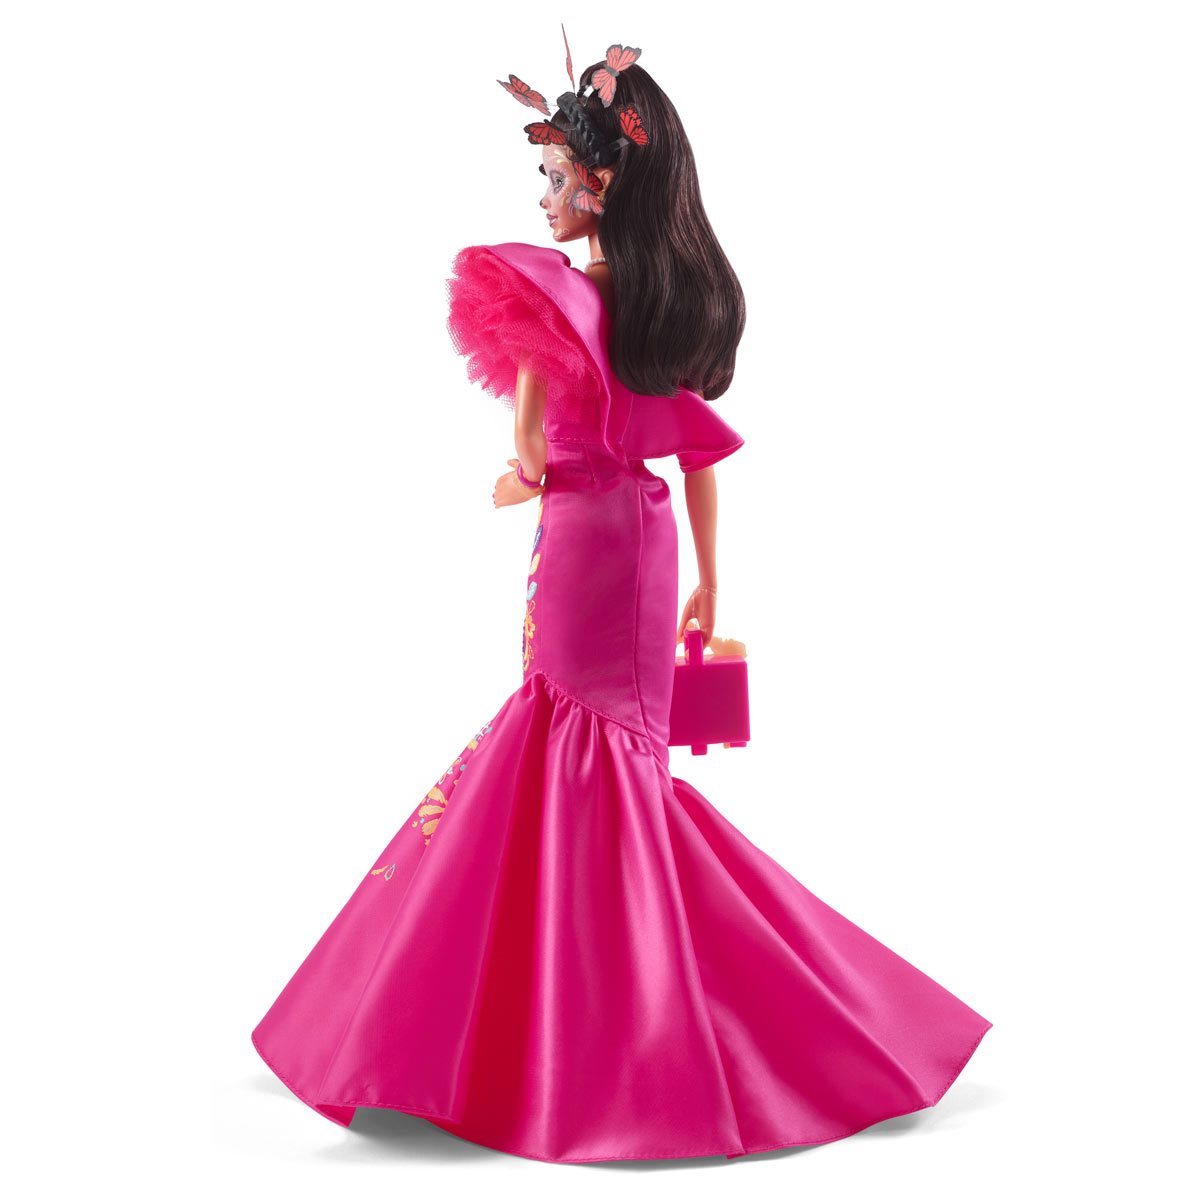 Barbie Pink Collection Doll - Entertainment Earth